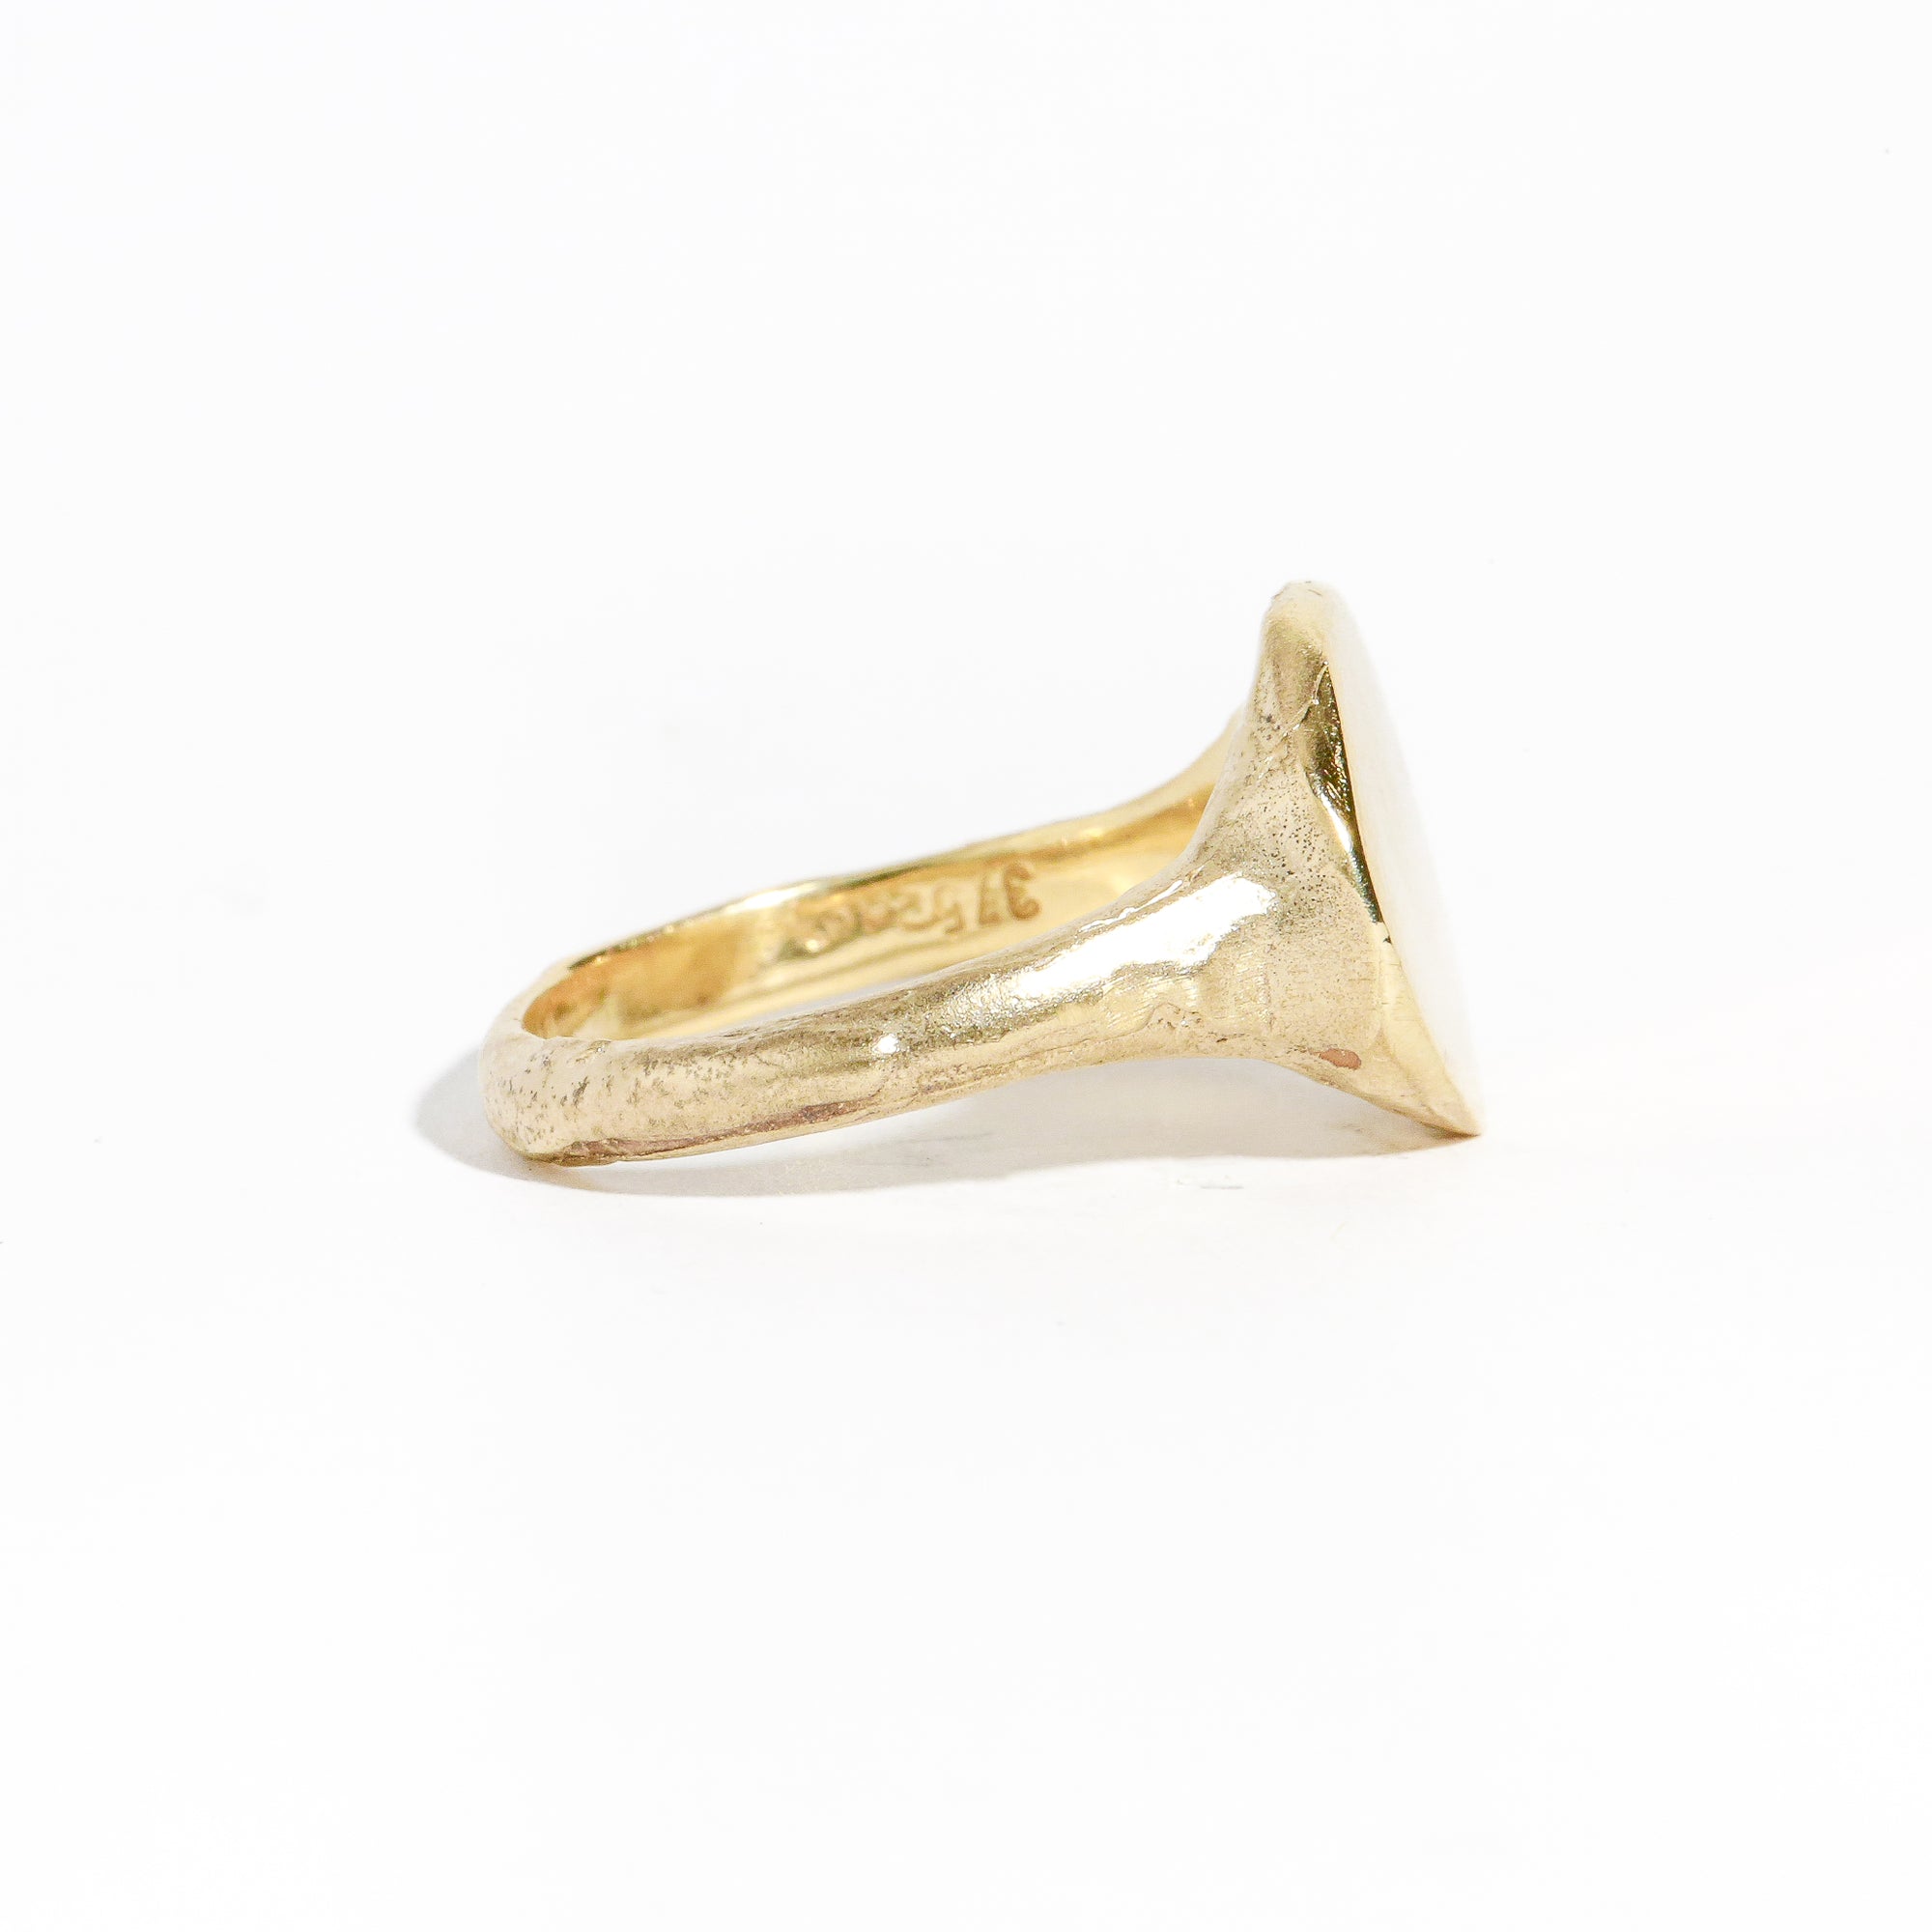 9 carat yellow gold round signet ring with a polished surface and soft matte band.